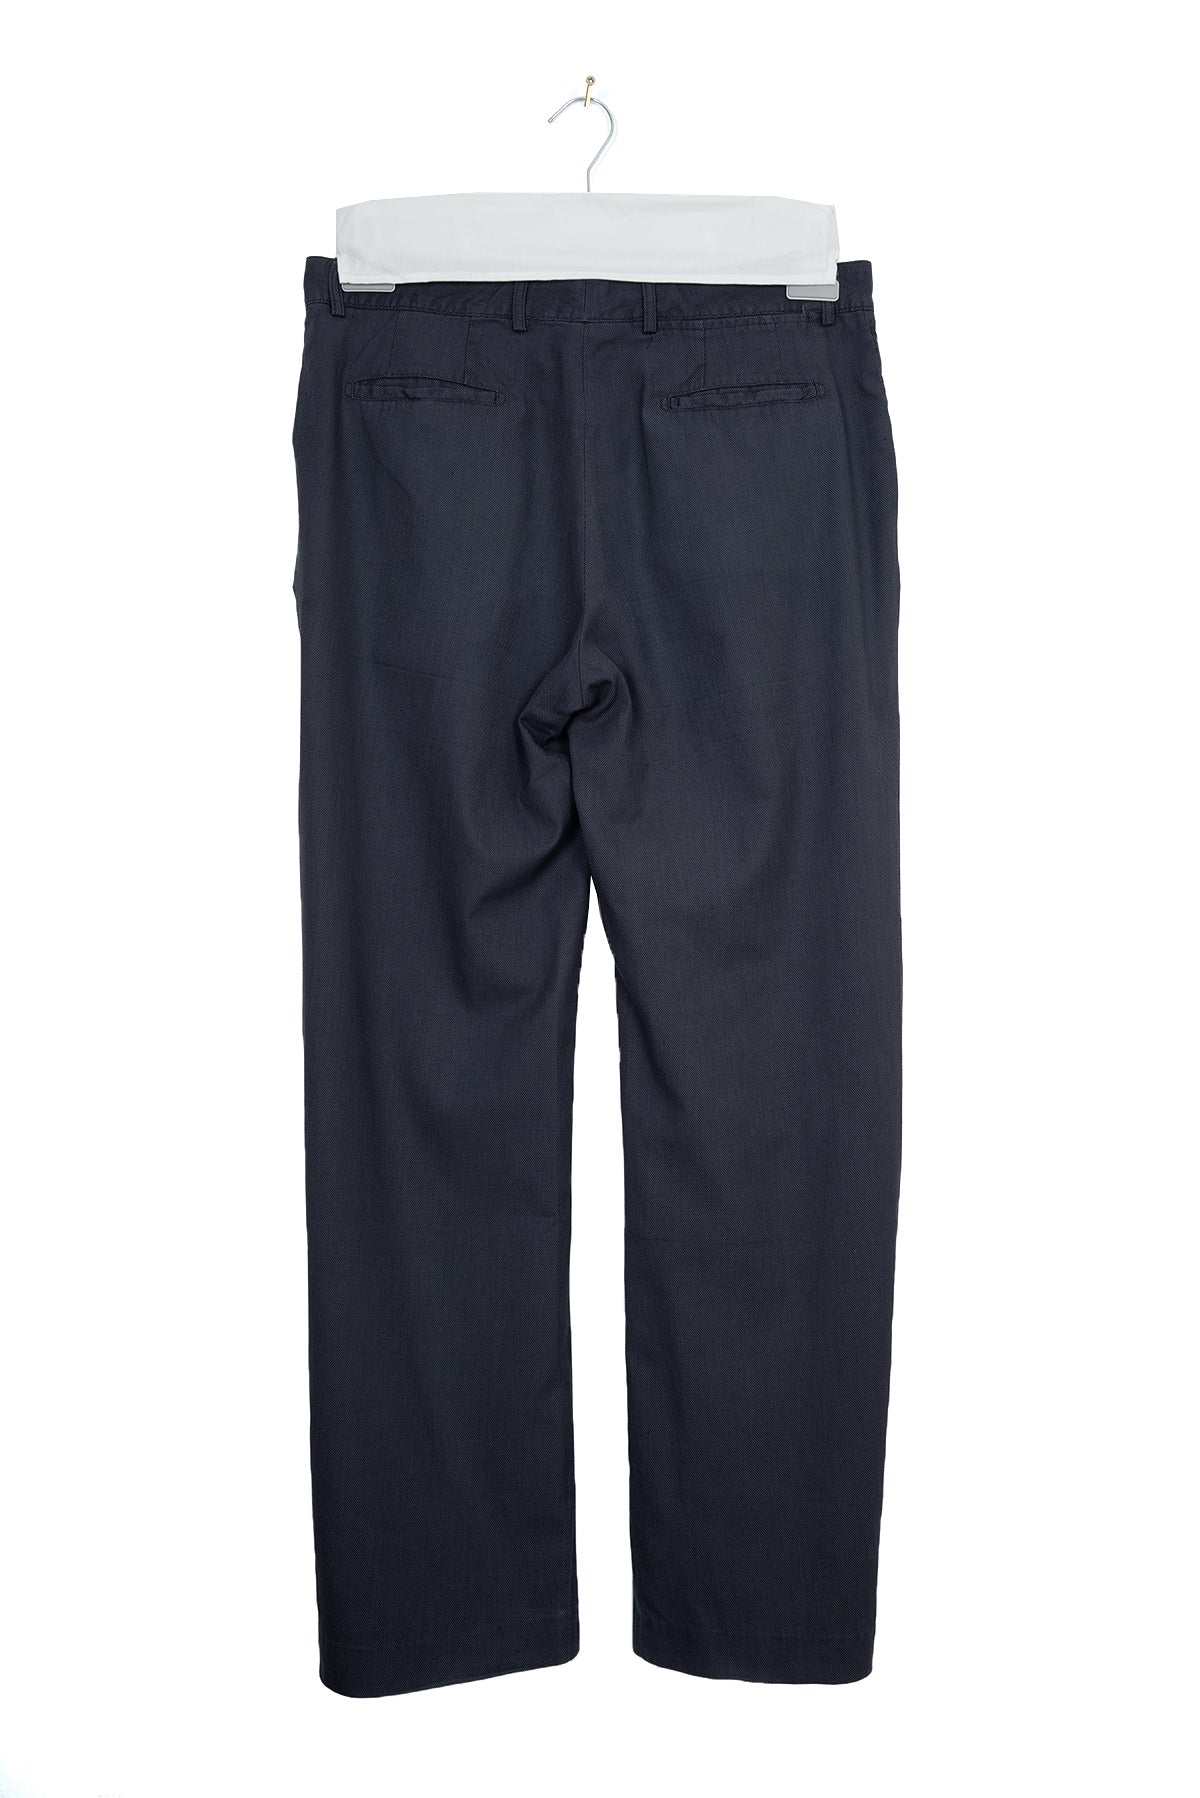 2000 S/S ANATOMIC PANTS IN ANTHRACITE COTTON